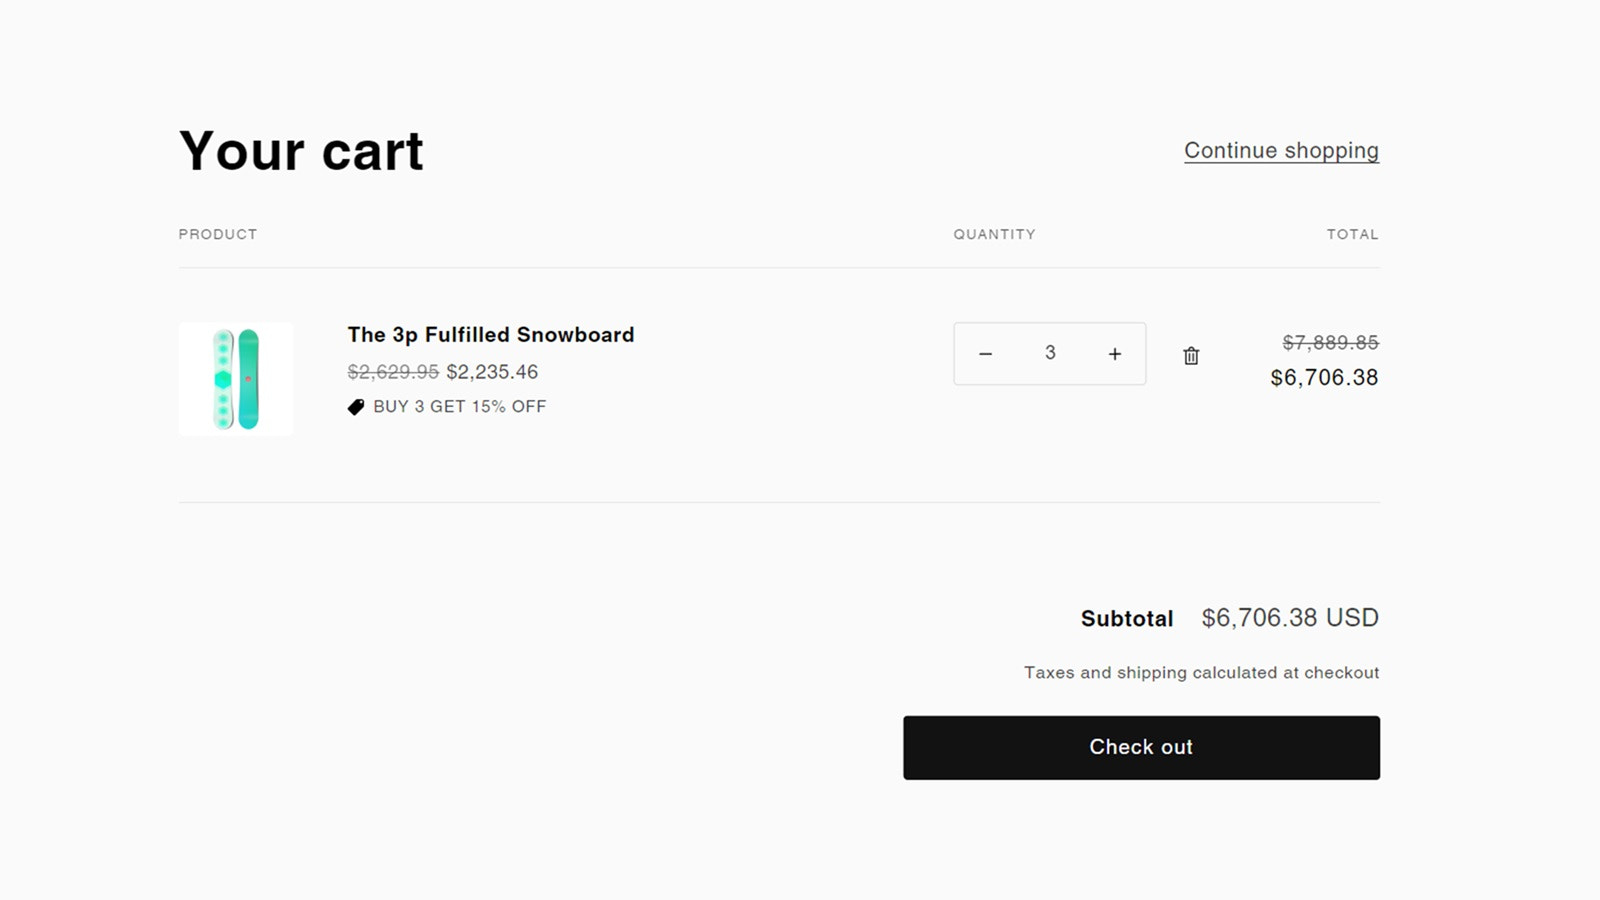 Discount applied dynamically on cart page as quantities change.